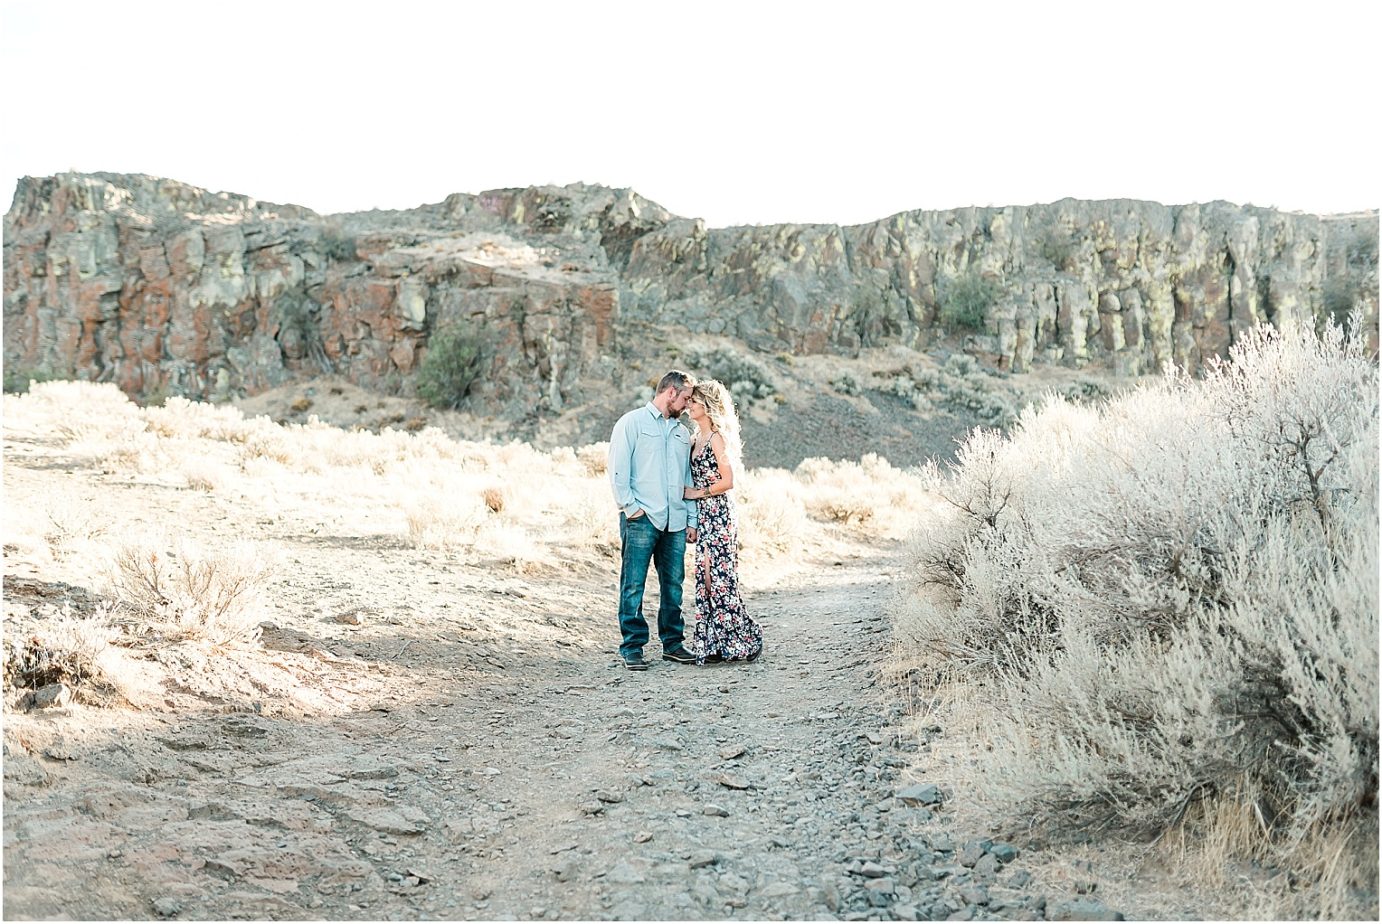 Frenchman Coulee Engagement Session Vantage WA Michael and Carley standing on the trail